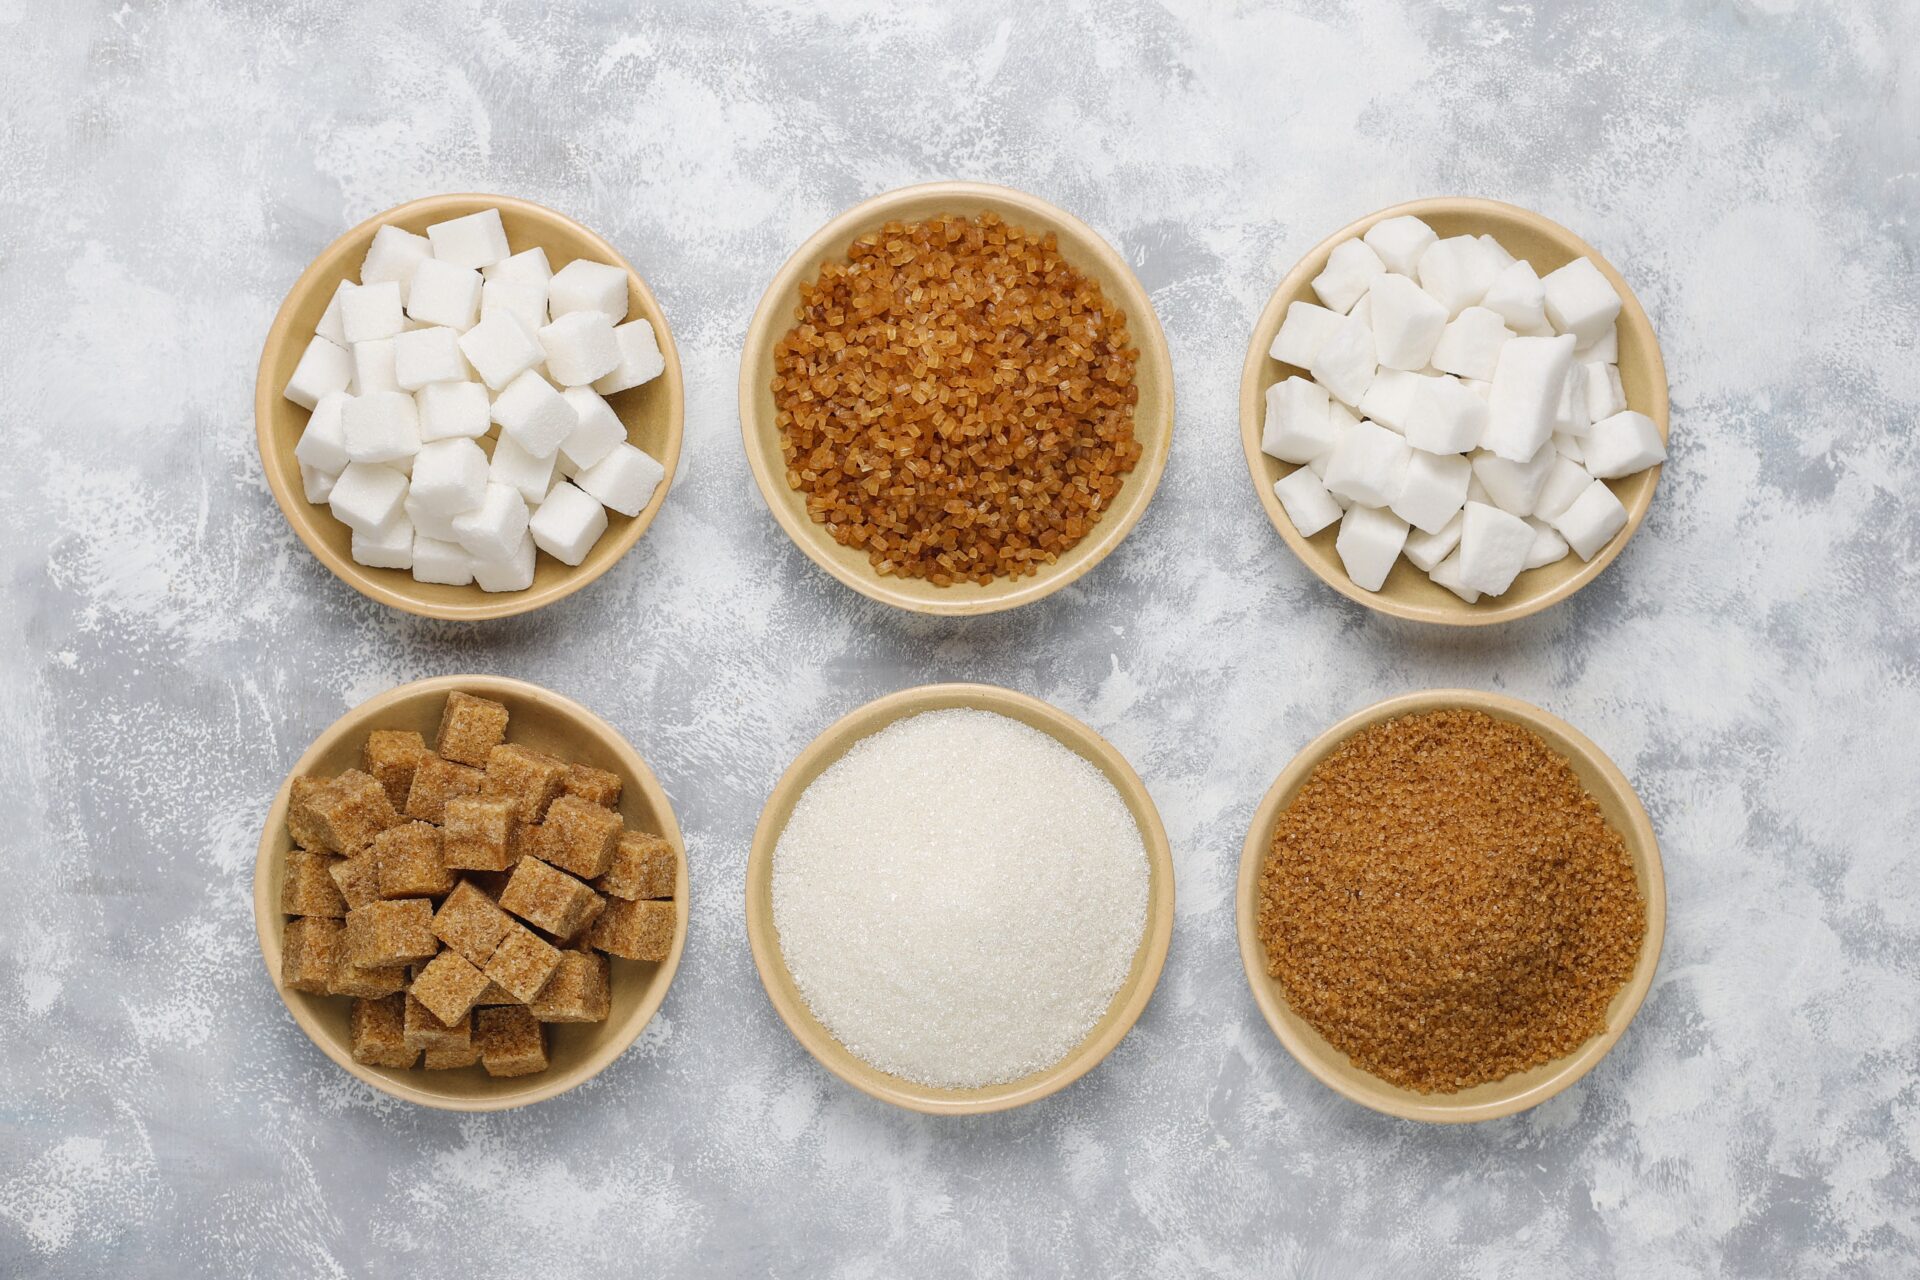 High Intensity Sweeteners Market Share, Trends, Growth, Industry Analysis, Key Players, Revenue, Future Development & Forecast